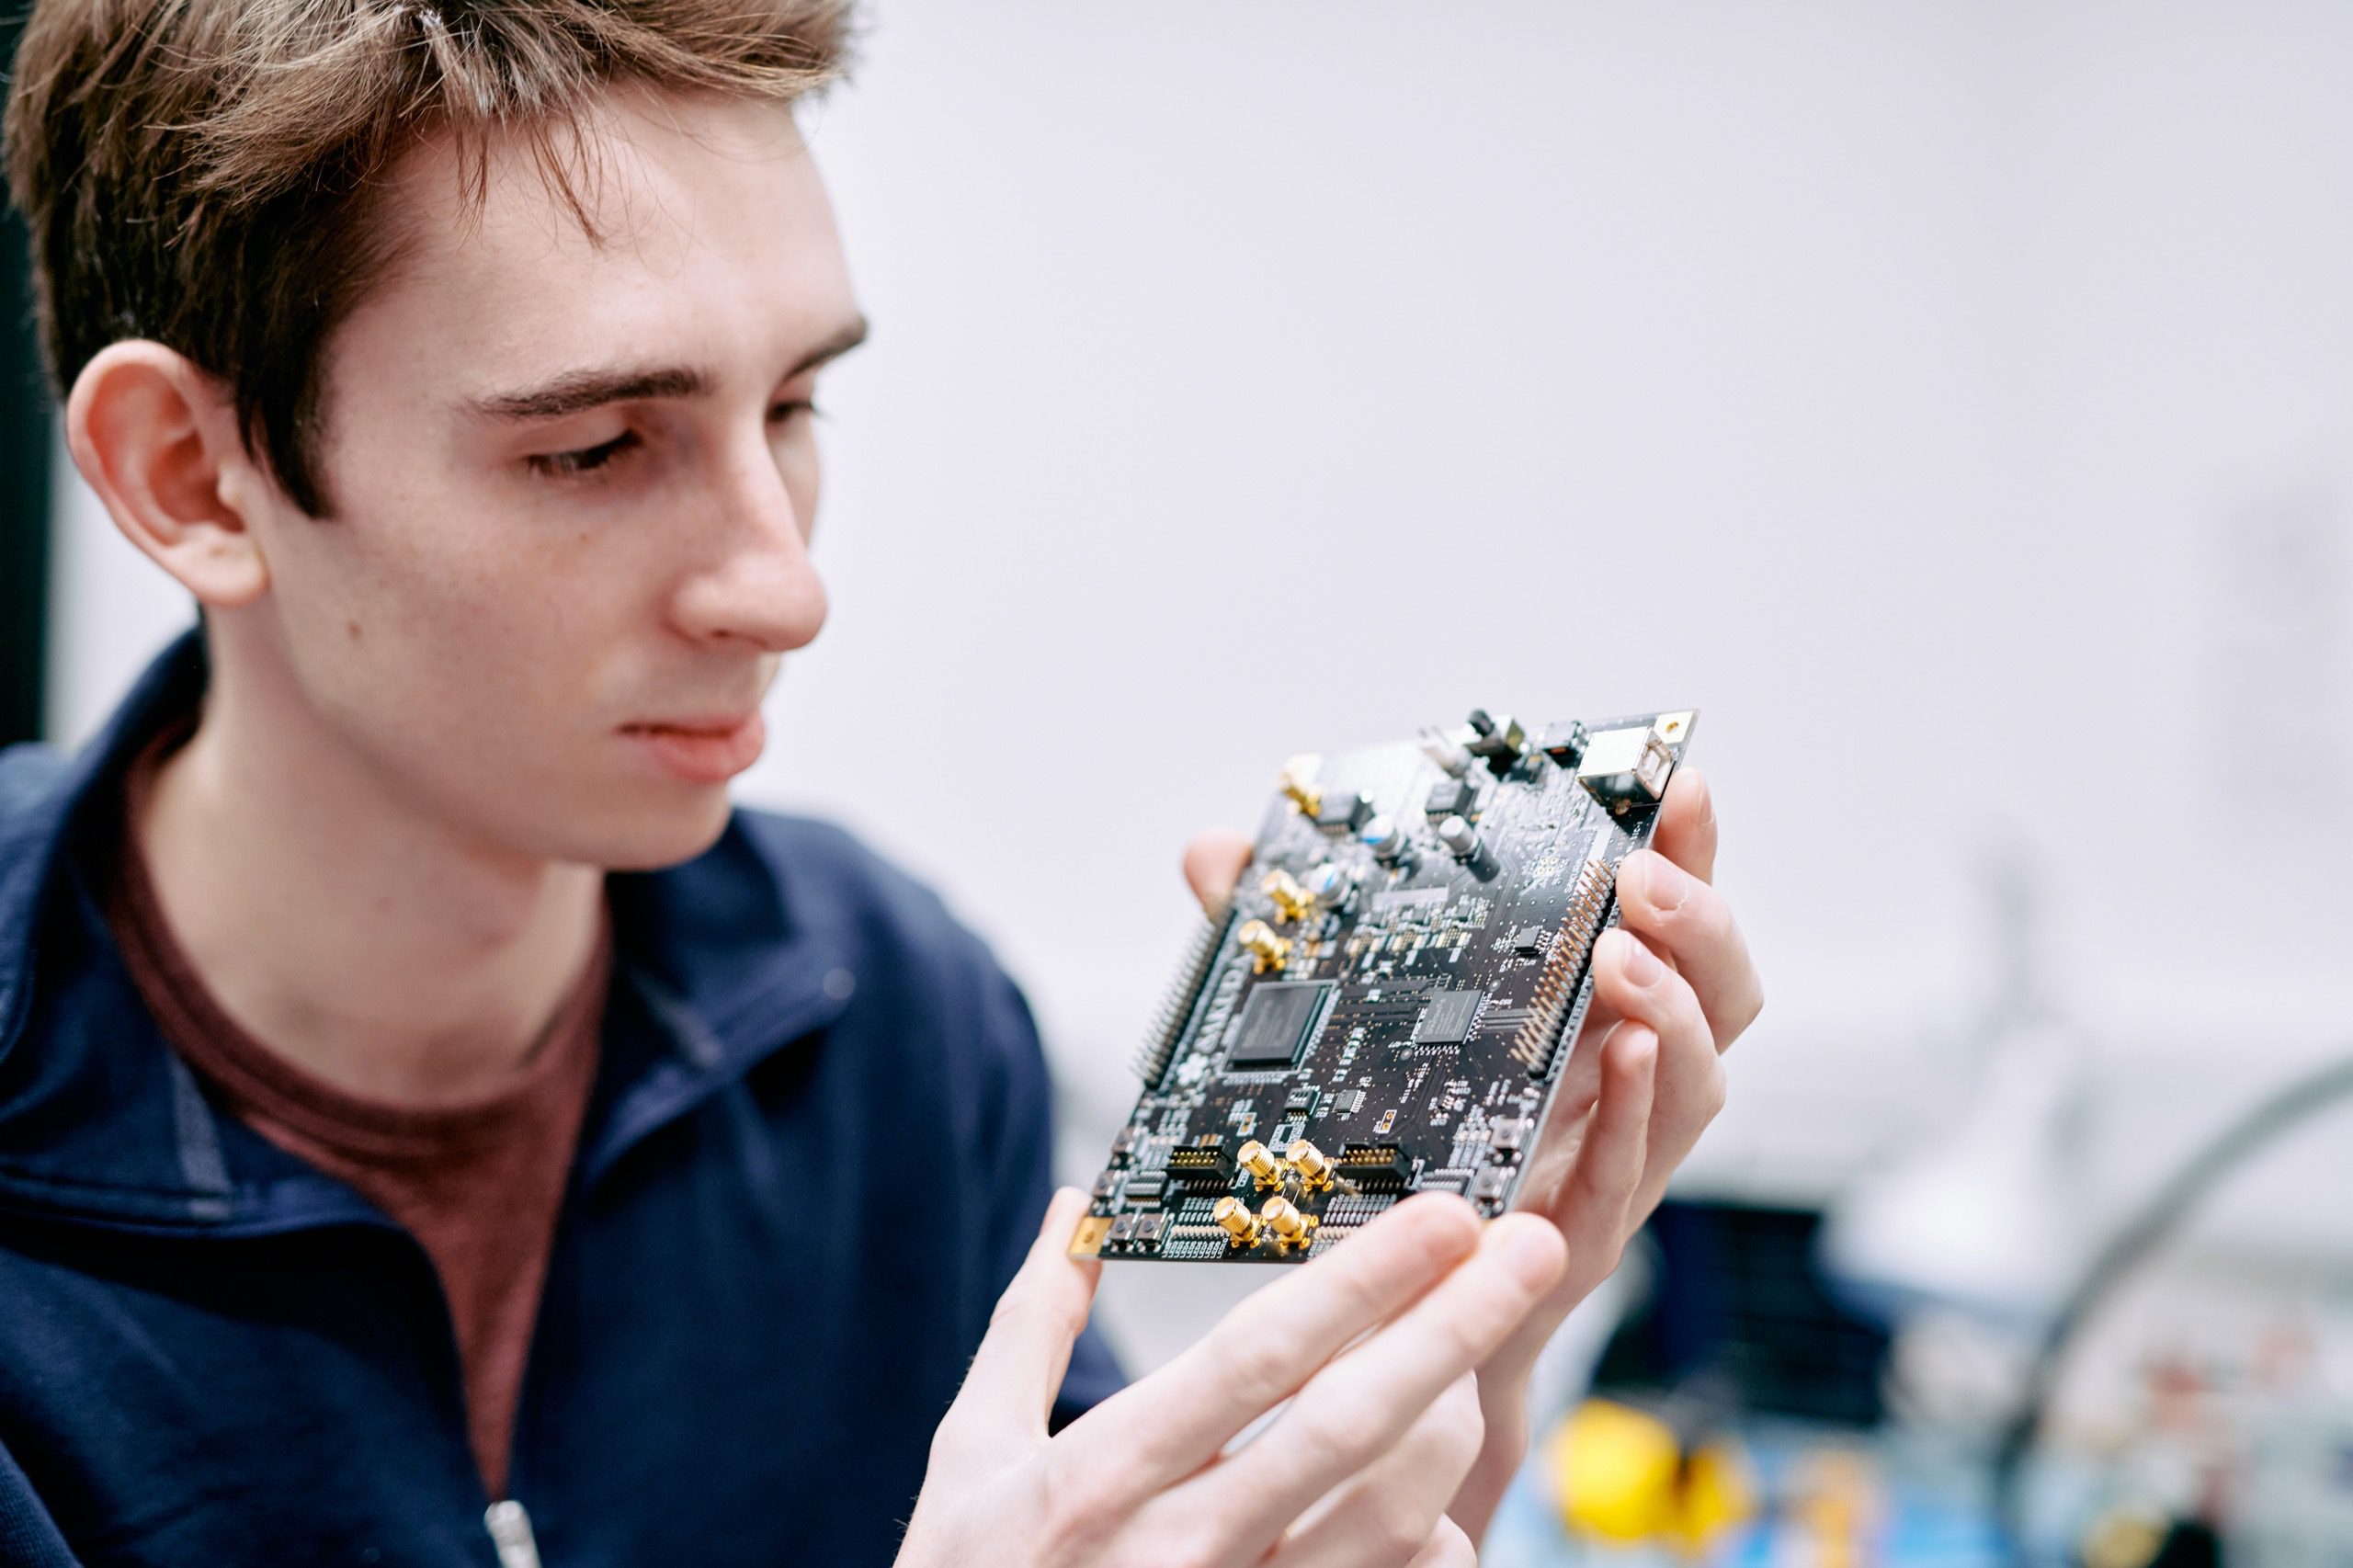 A man holding a circuit board by his fingertips.